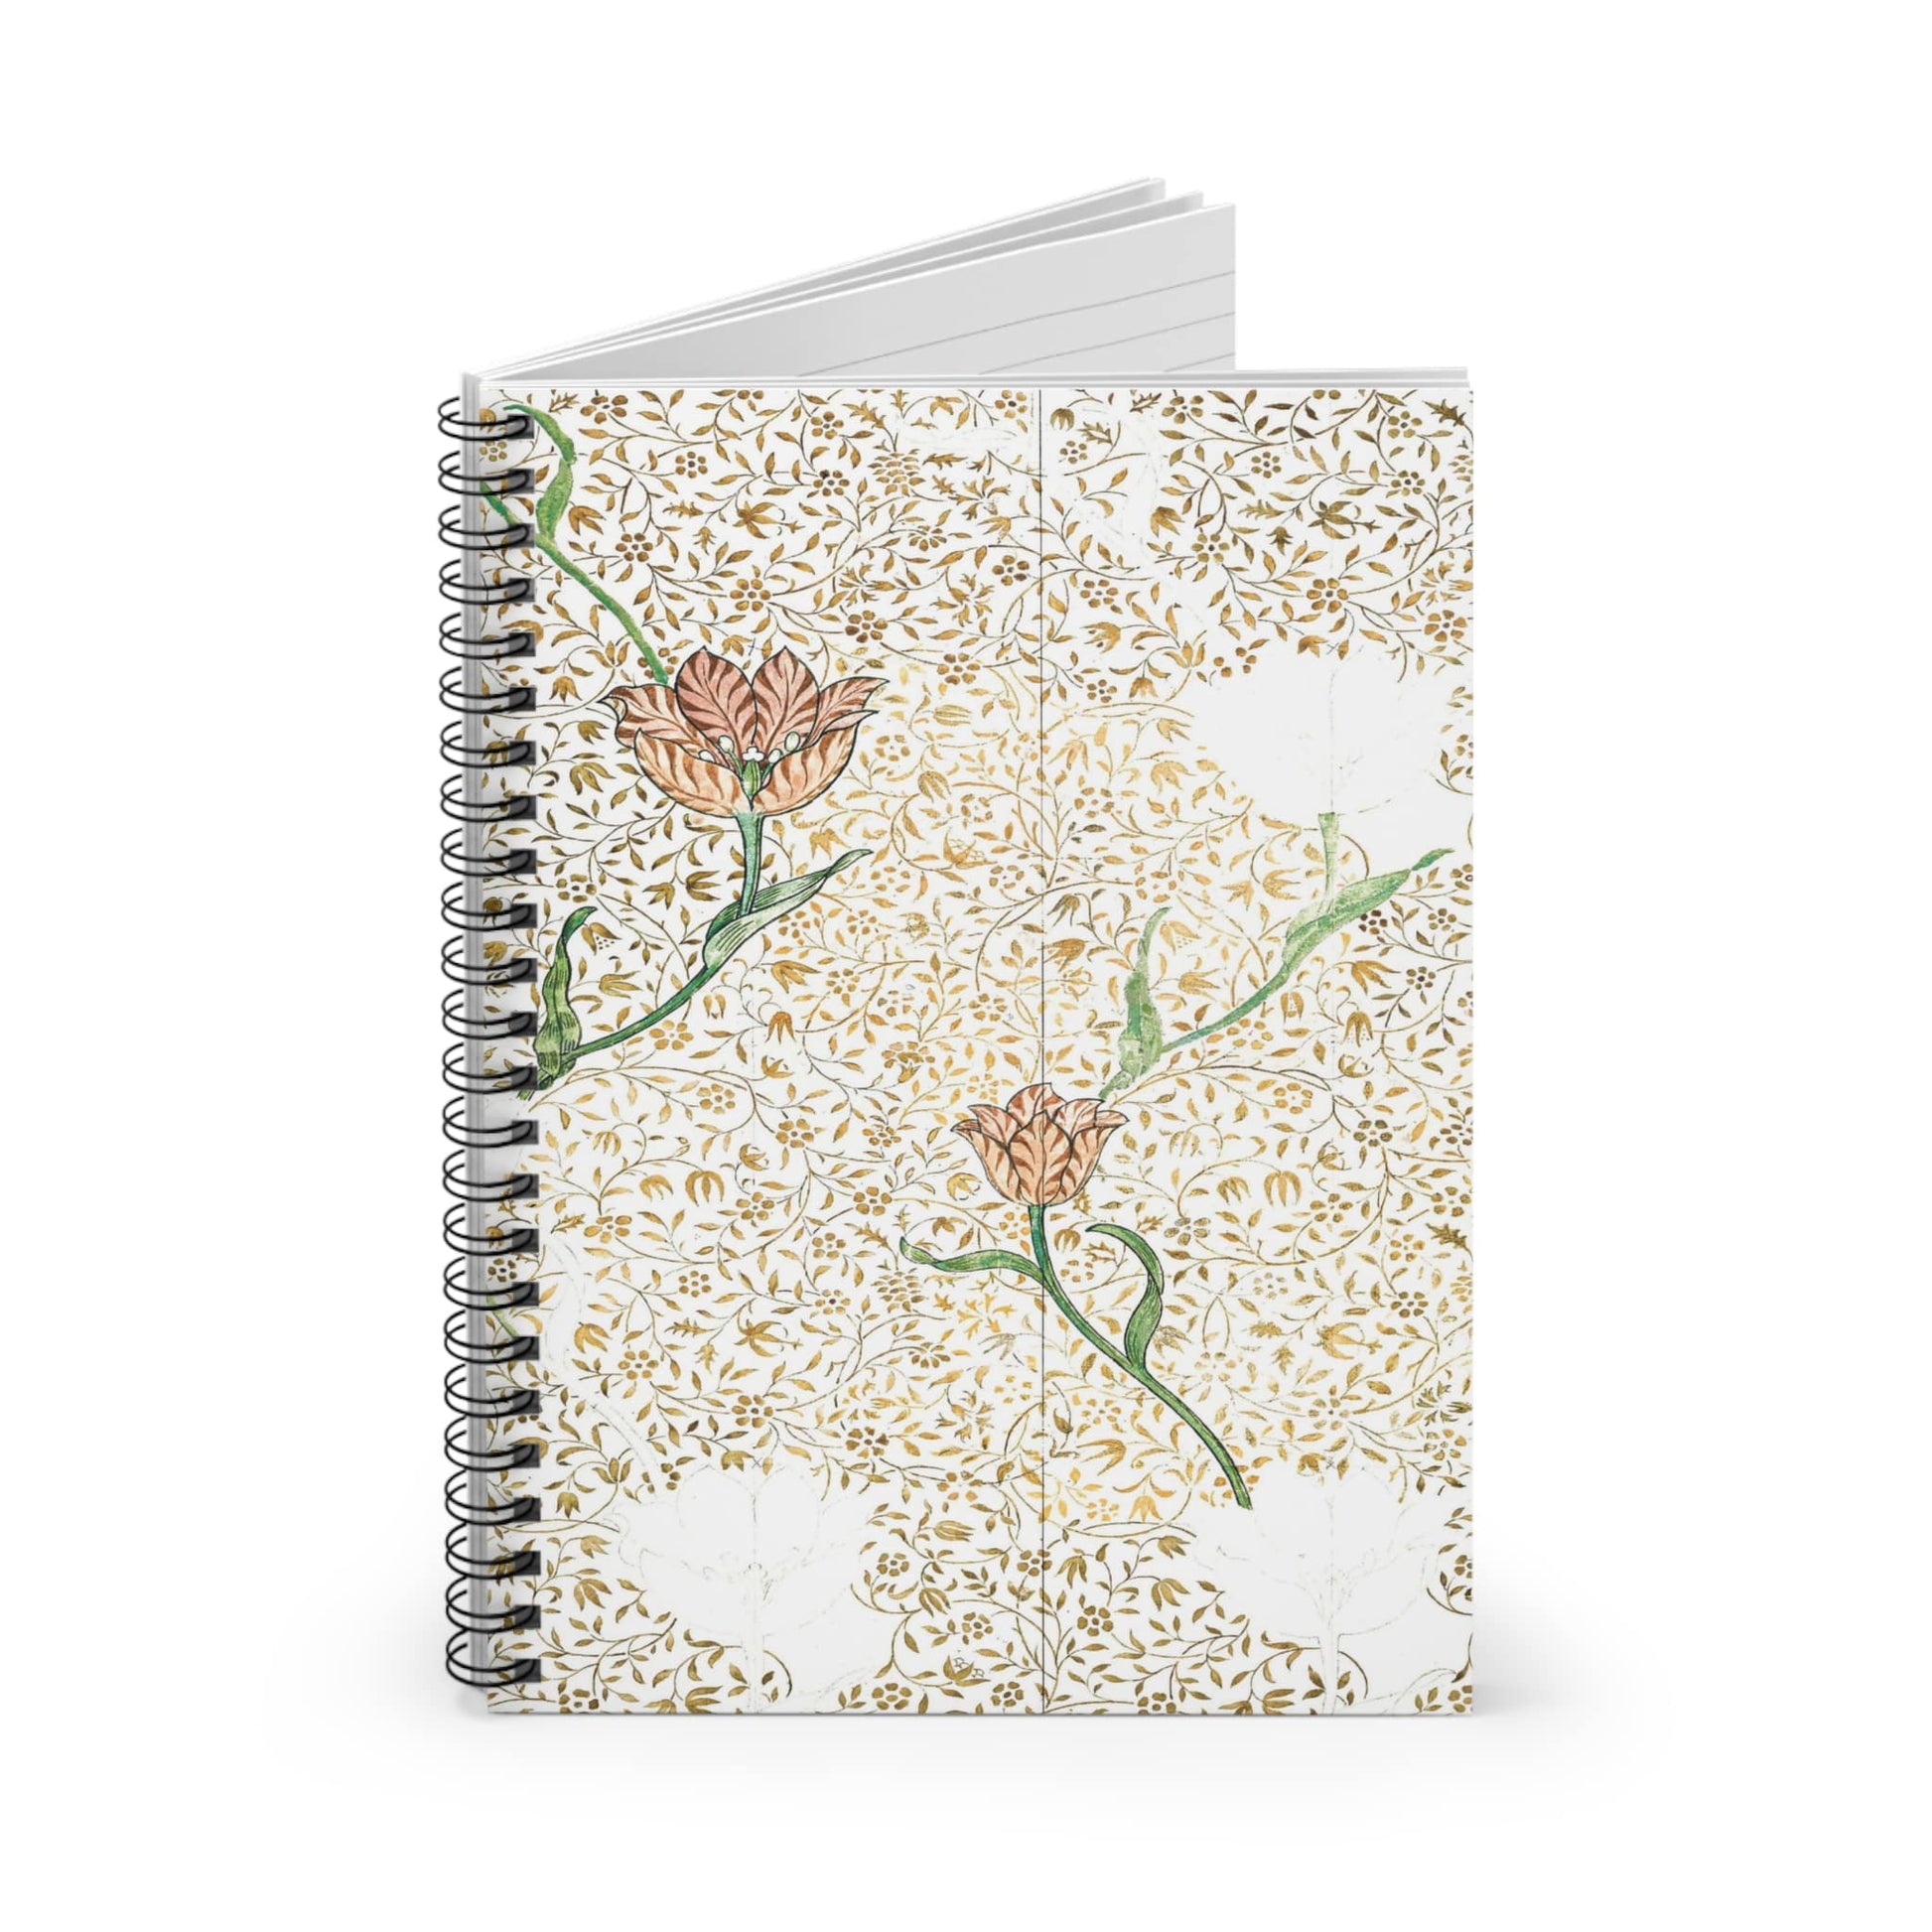 Aesthetic Floral Spiral Notebook Standing up on White Desk